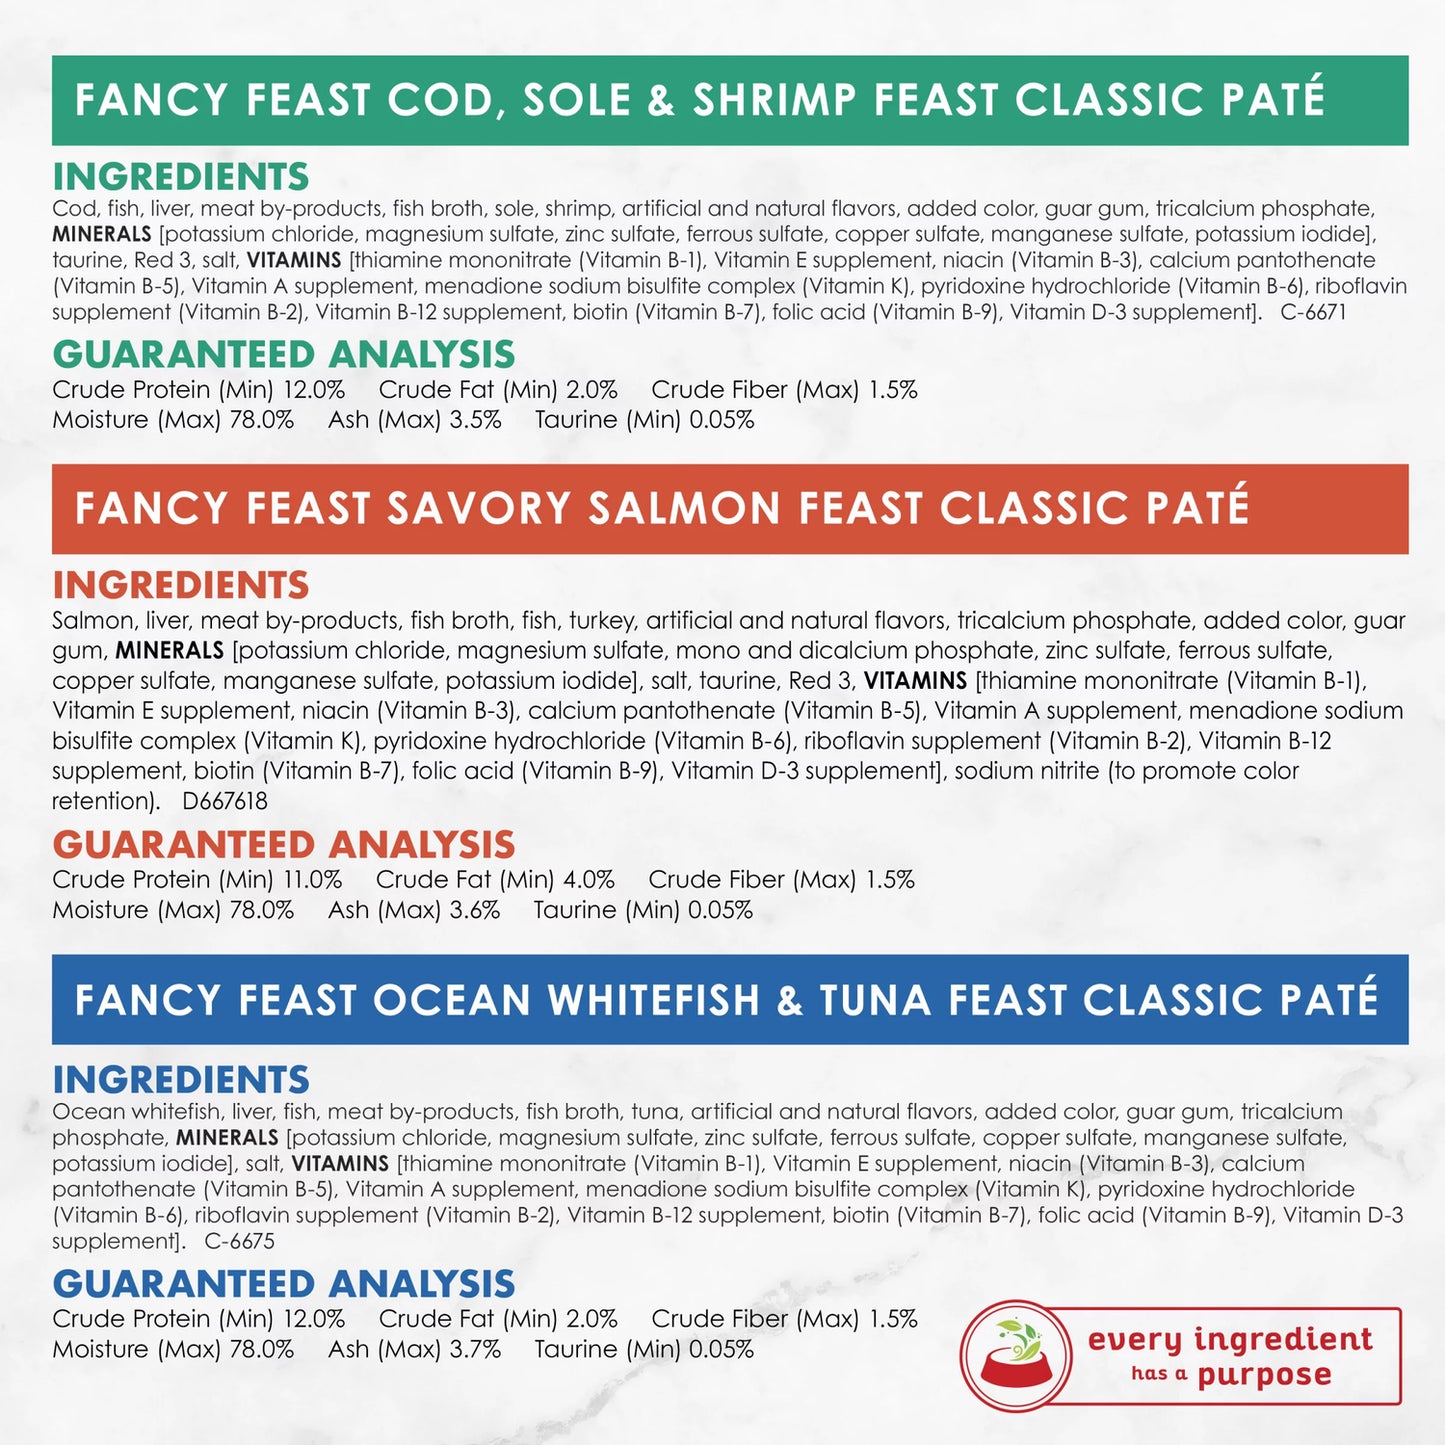 (12 Pack) Fancy Feast Grain Free Pate Wet Cat Food Variety Pack, Seafood Classic Pate Collection, 3 Oz. Cans